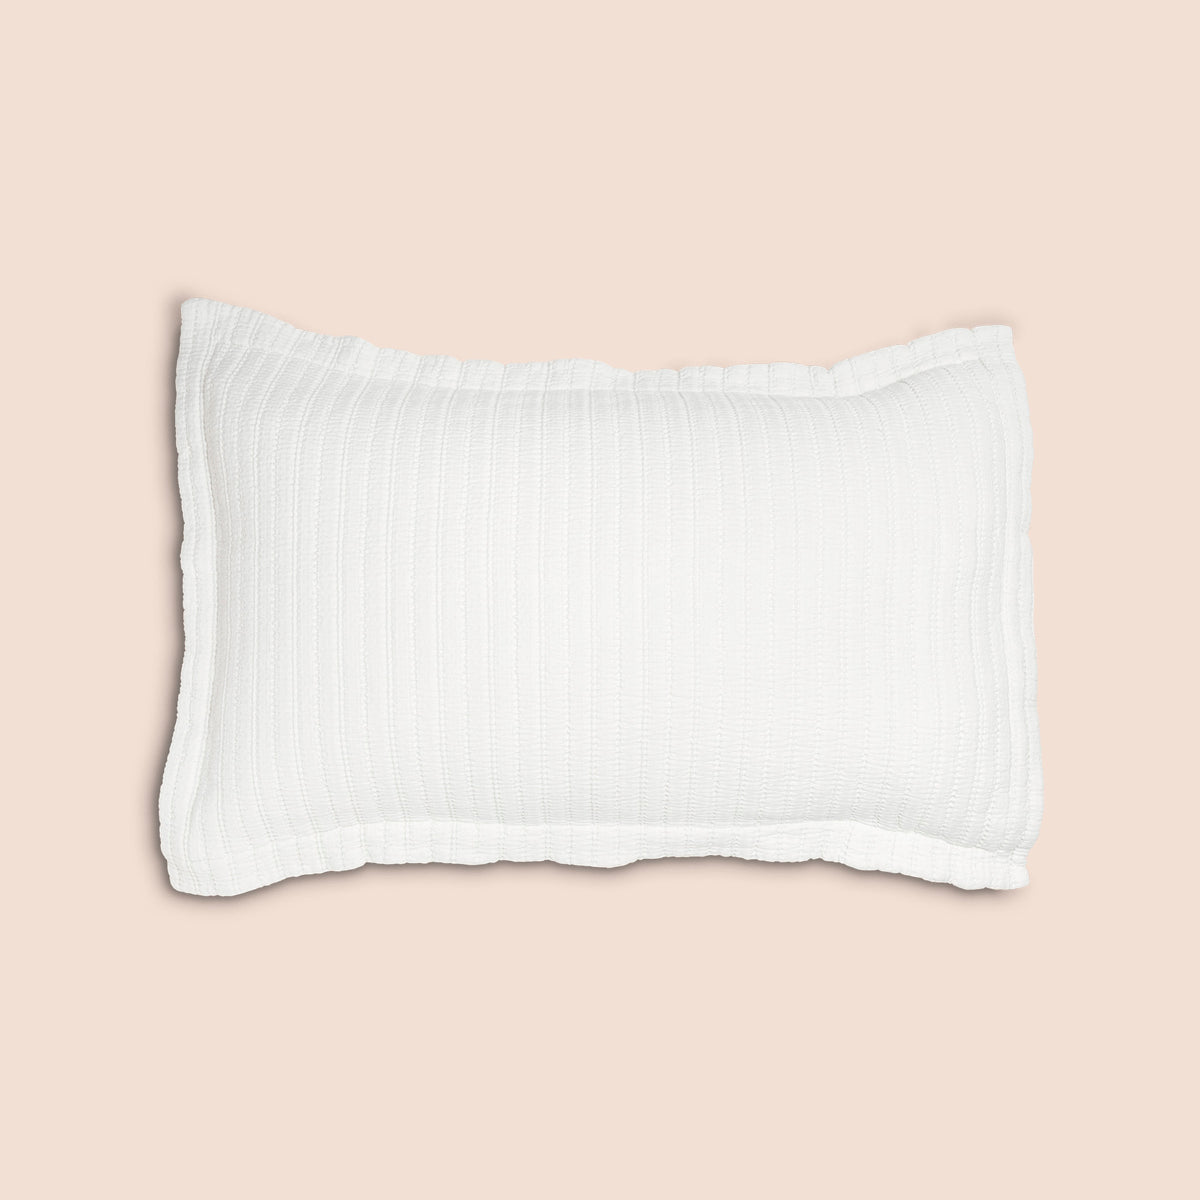 Image of the Ecru Ridgeback Pillow Sham featured on a pillow with a light pink background